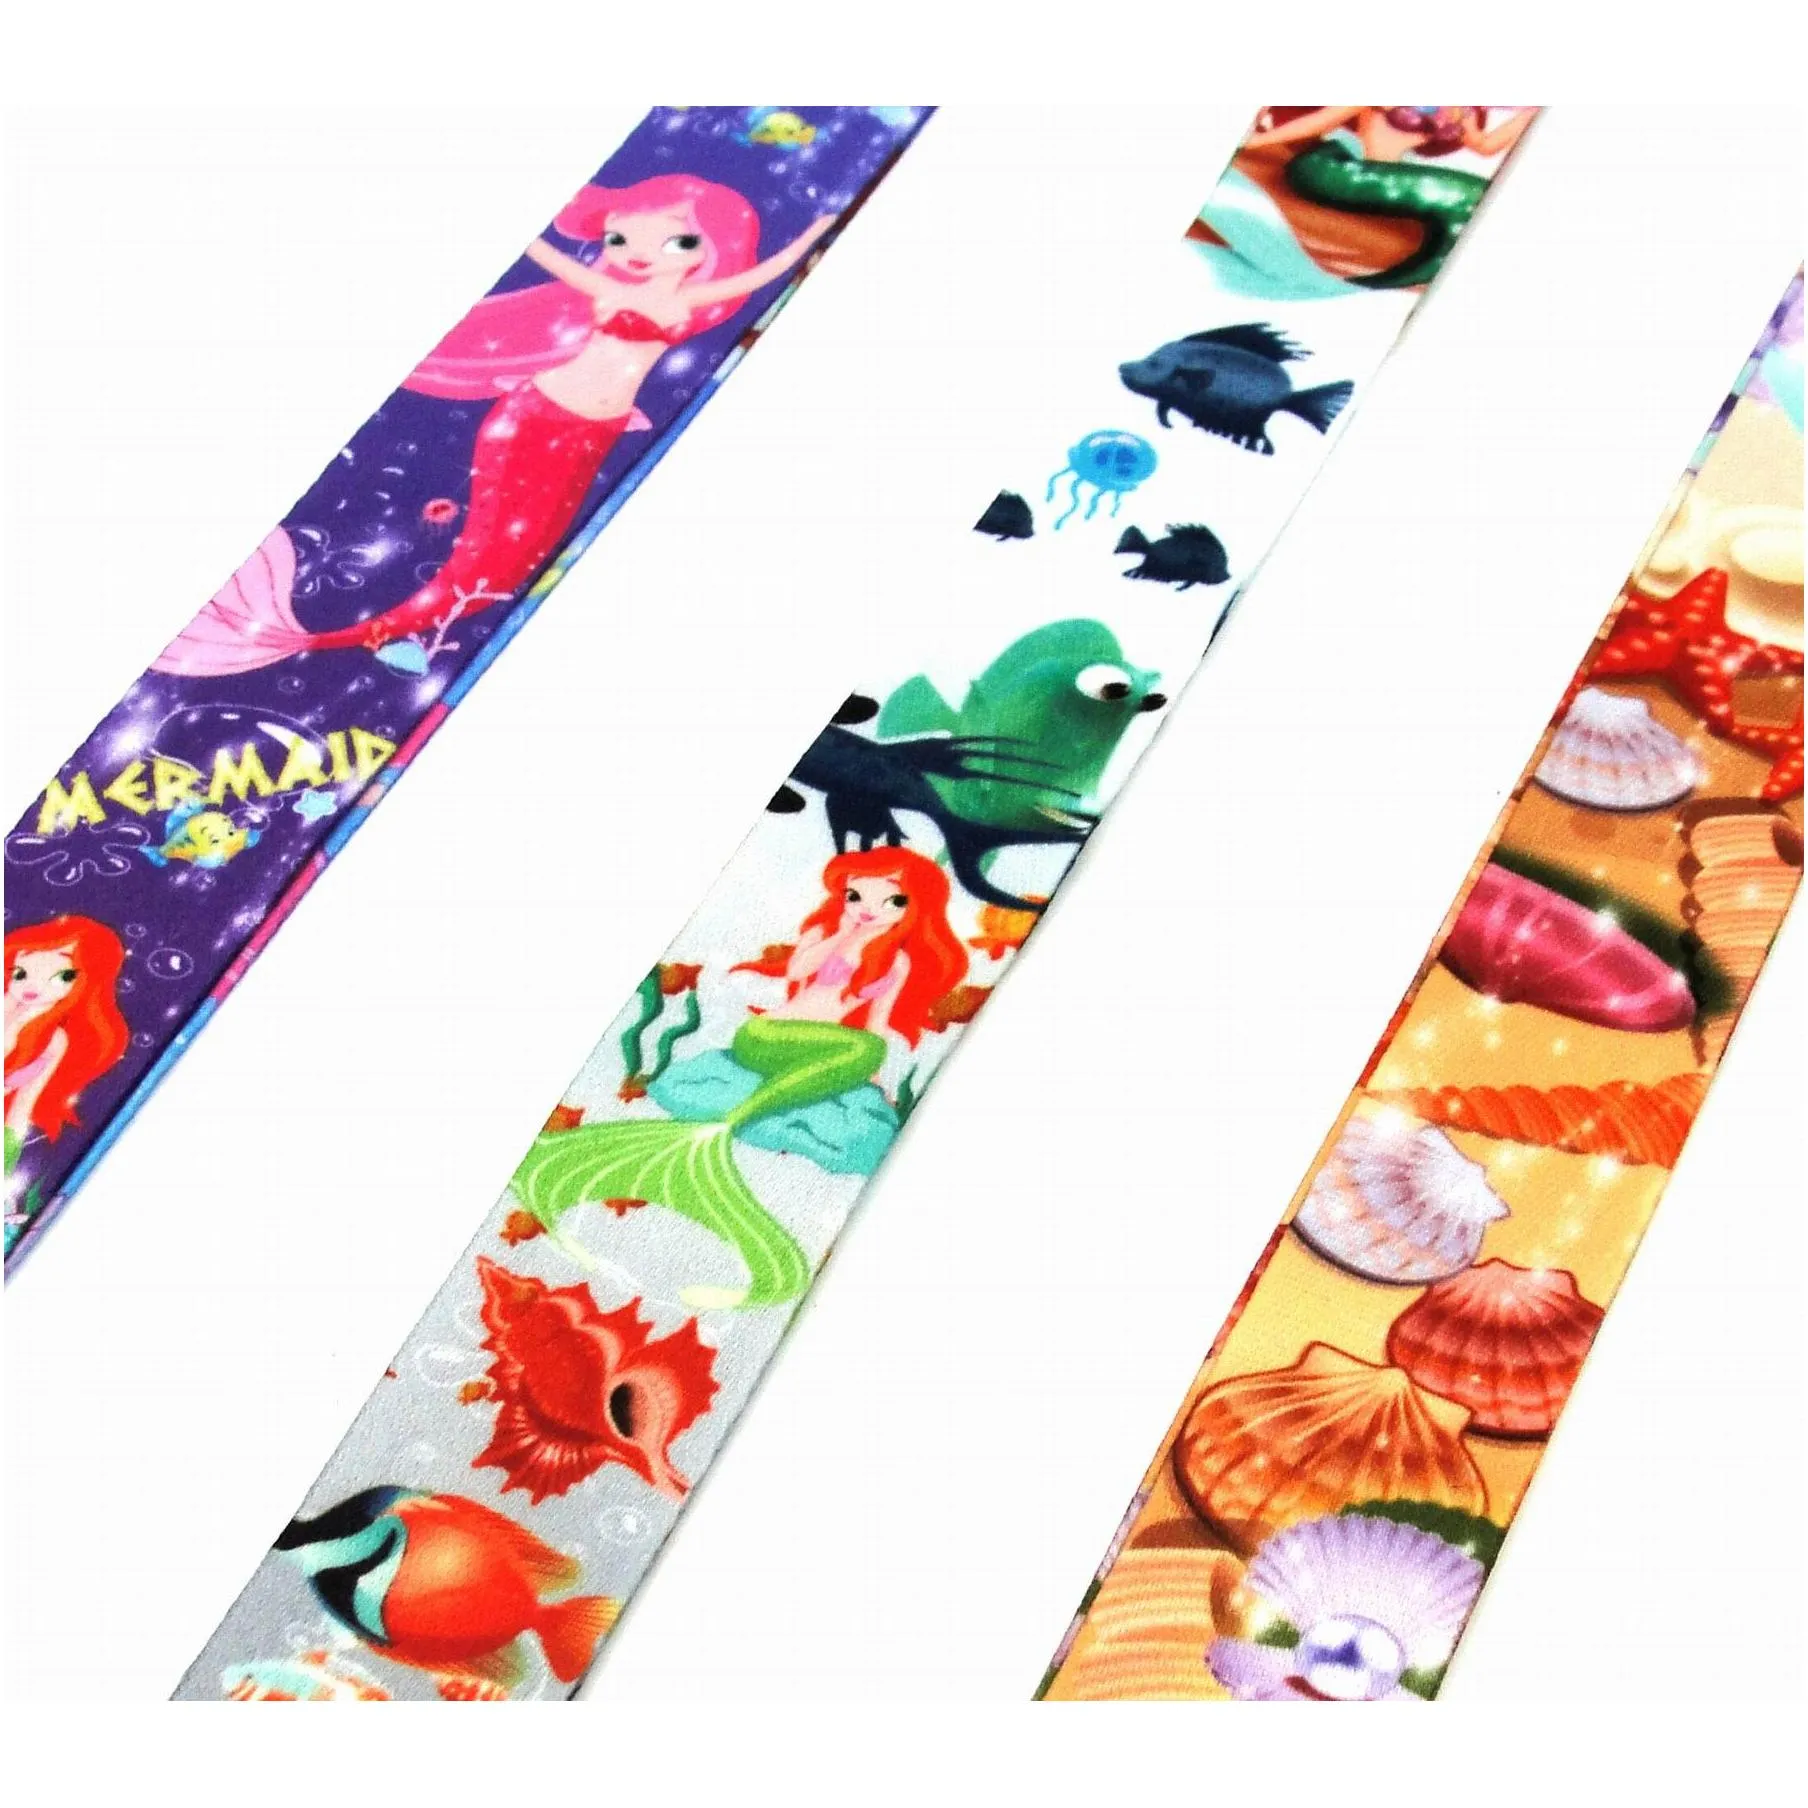 factory price 100 piec mermaid anime lanyard keychain neck strap key camera id phone string pendant badge party gift accessories